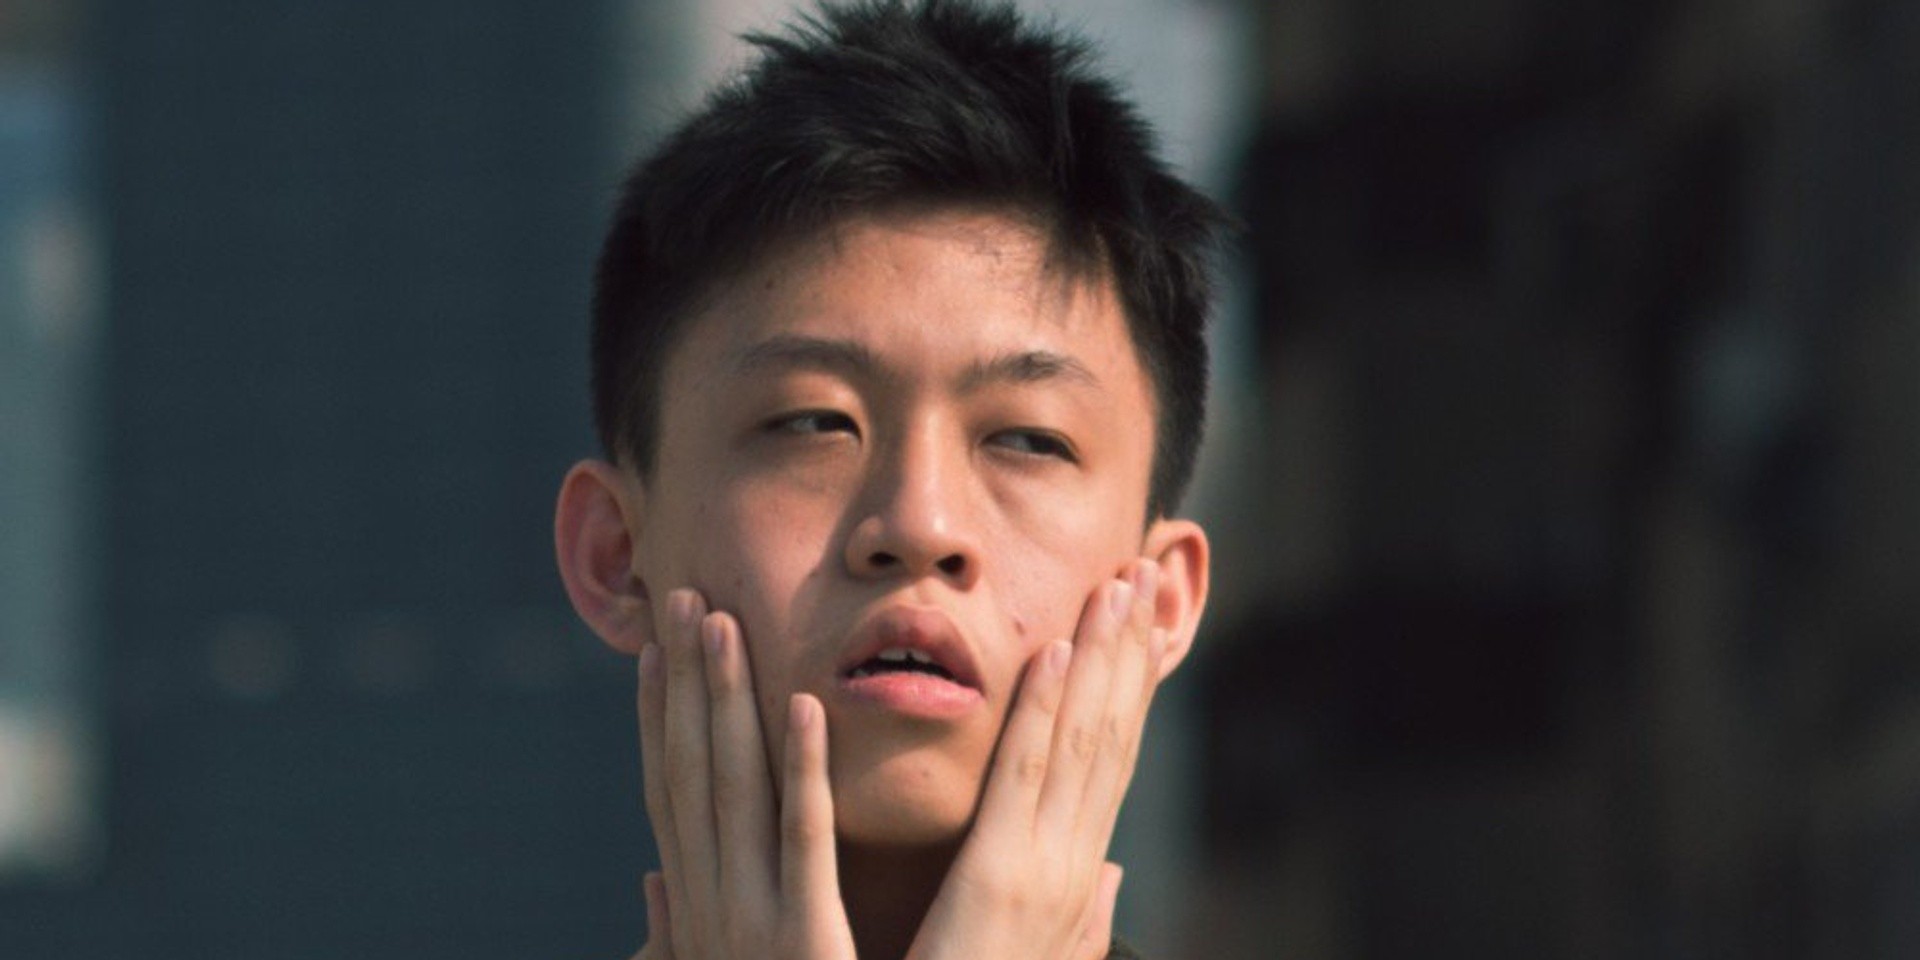 Ultra Singapore's Phase 2 line-up includes Rich Chigga, Myrne, Sam Rui, and more